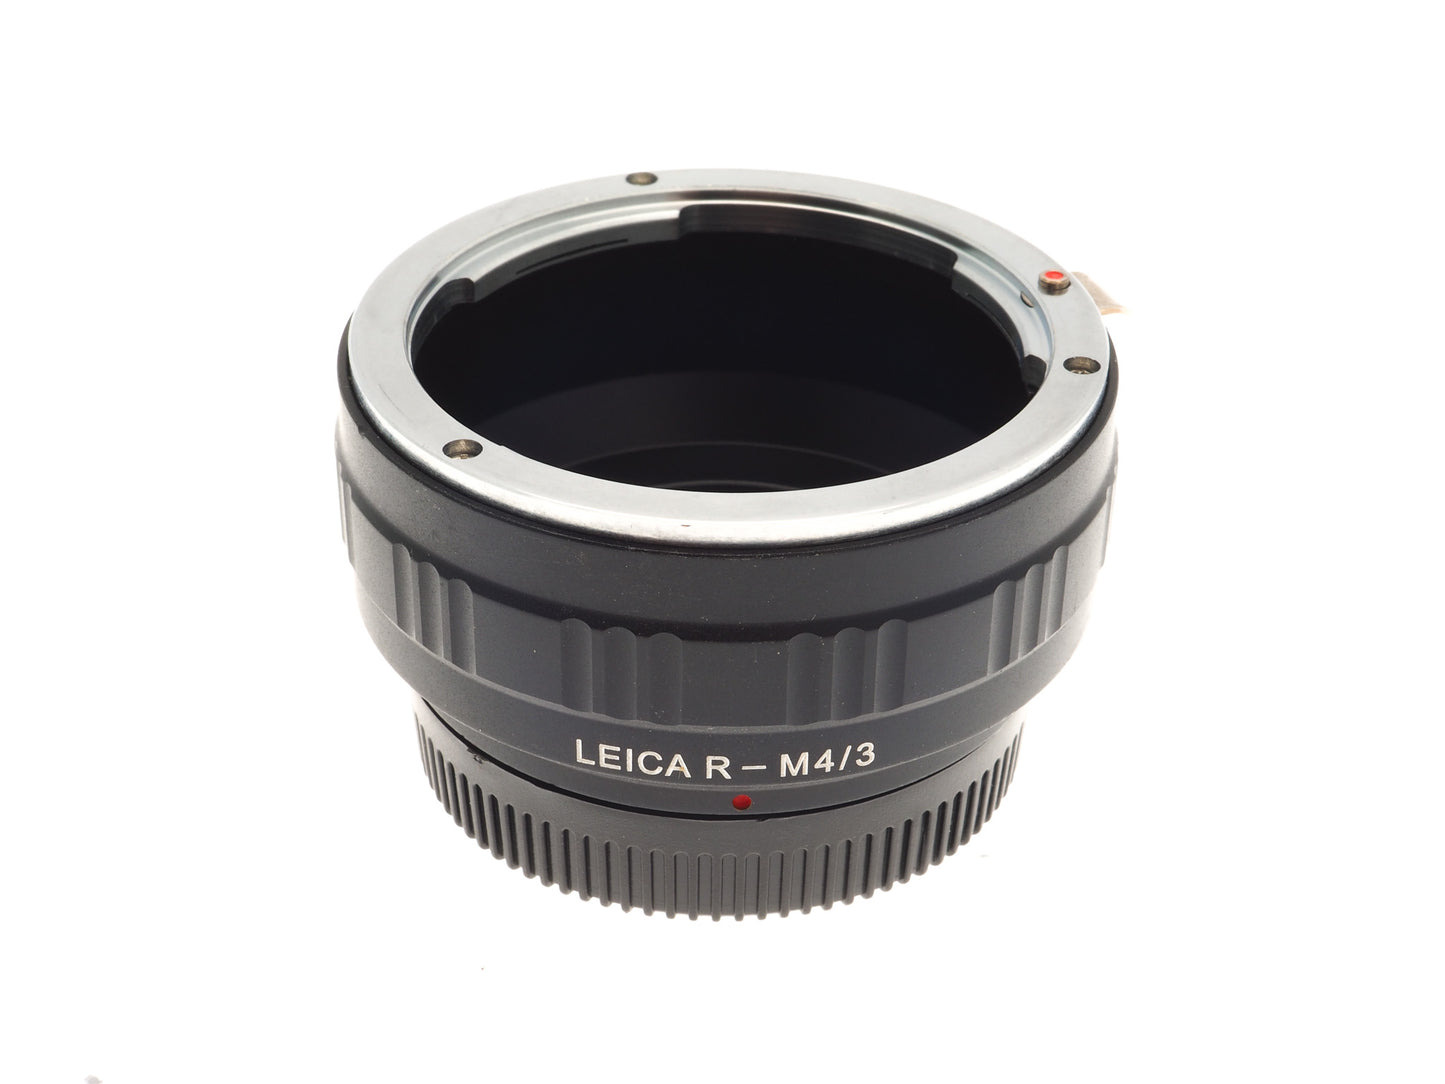 Generic Leica R - Micro Four Thirds (L/R - M4/3) Adapter - Lens Adapter